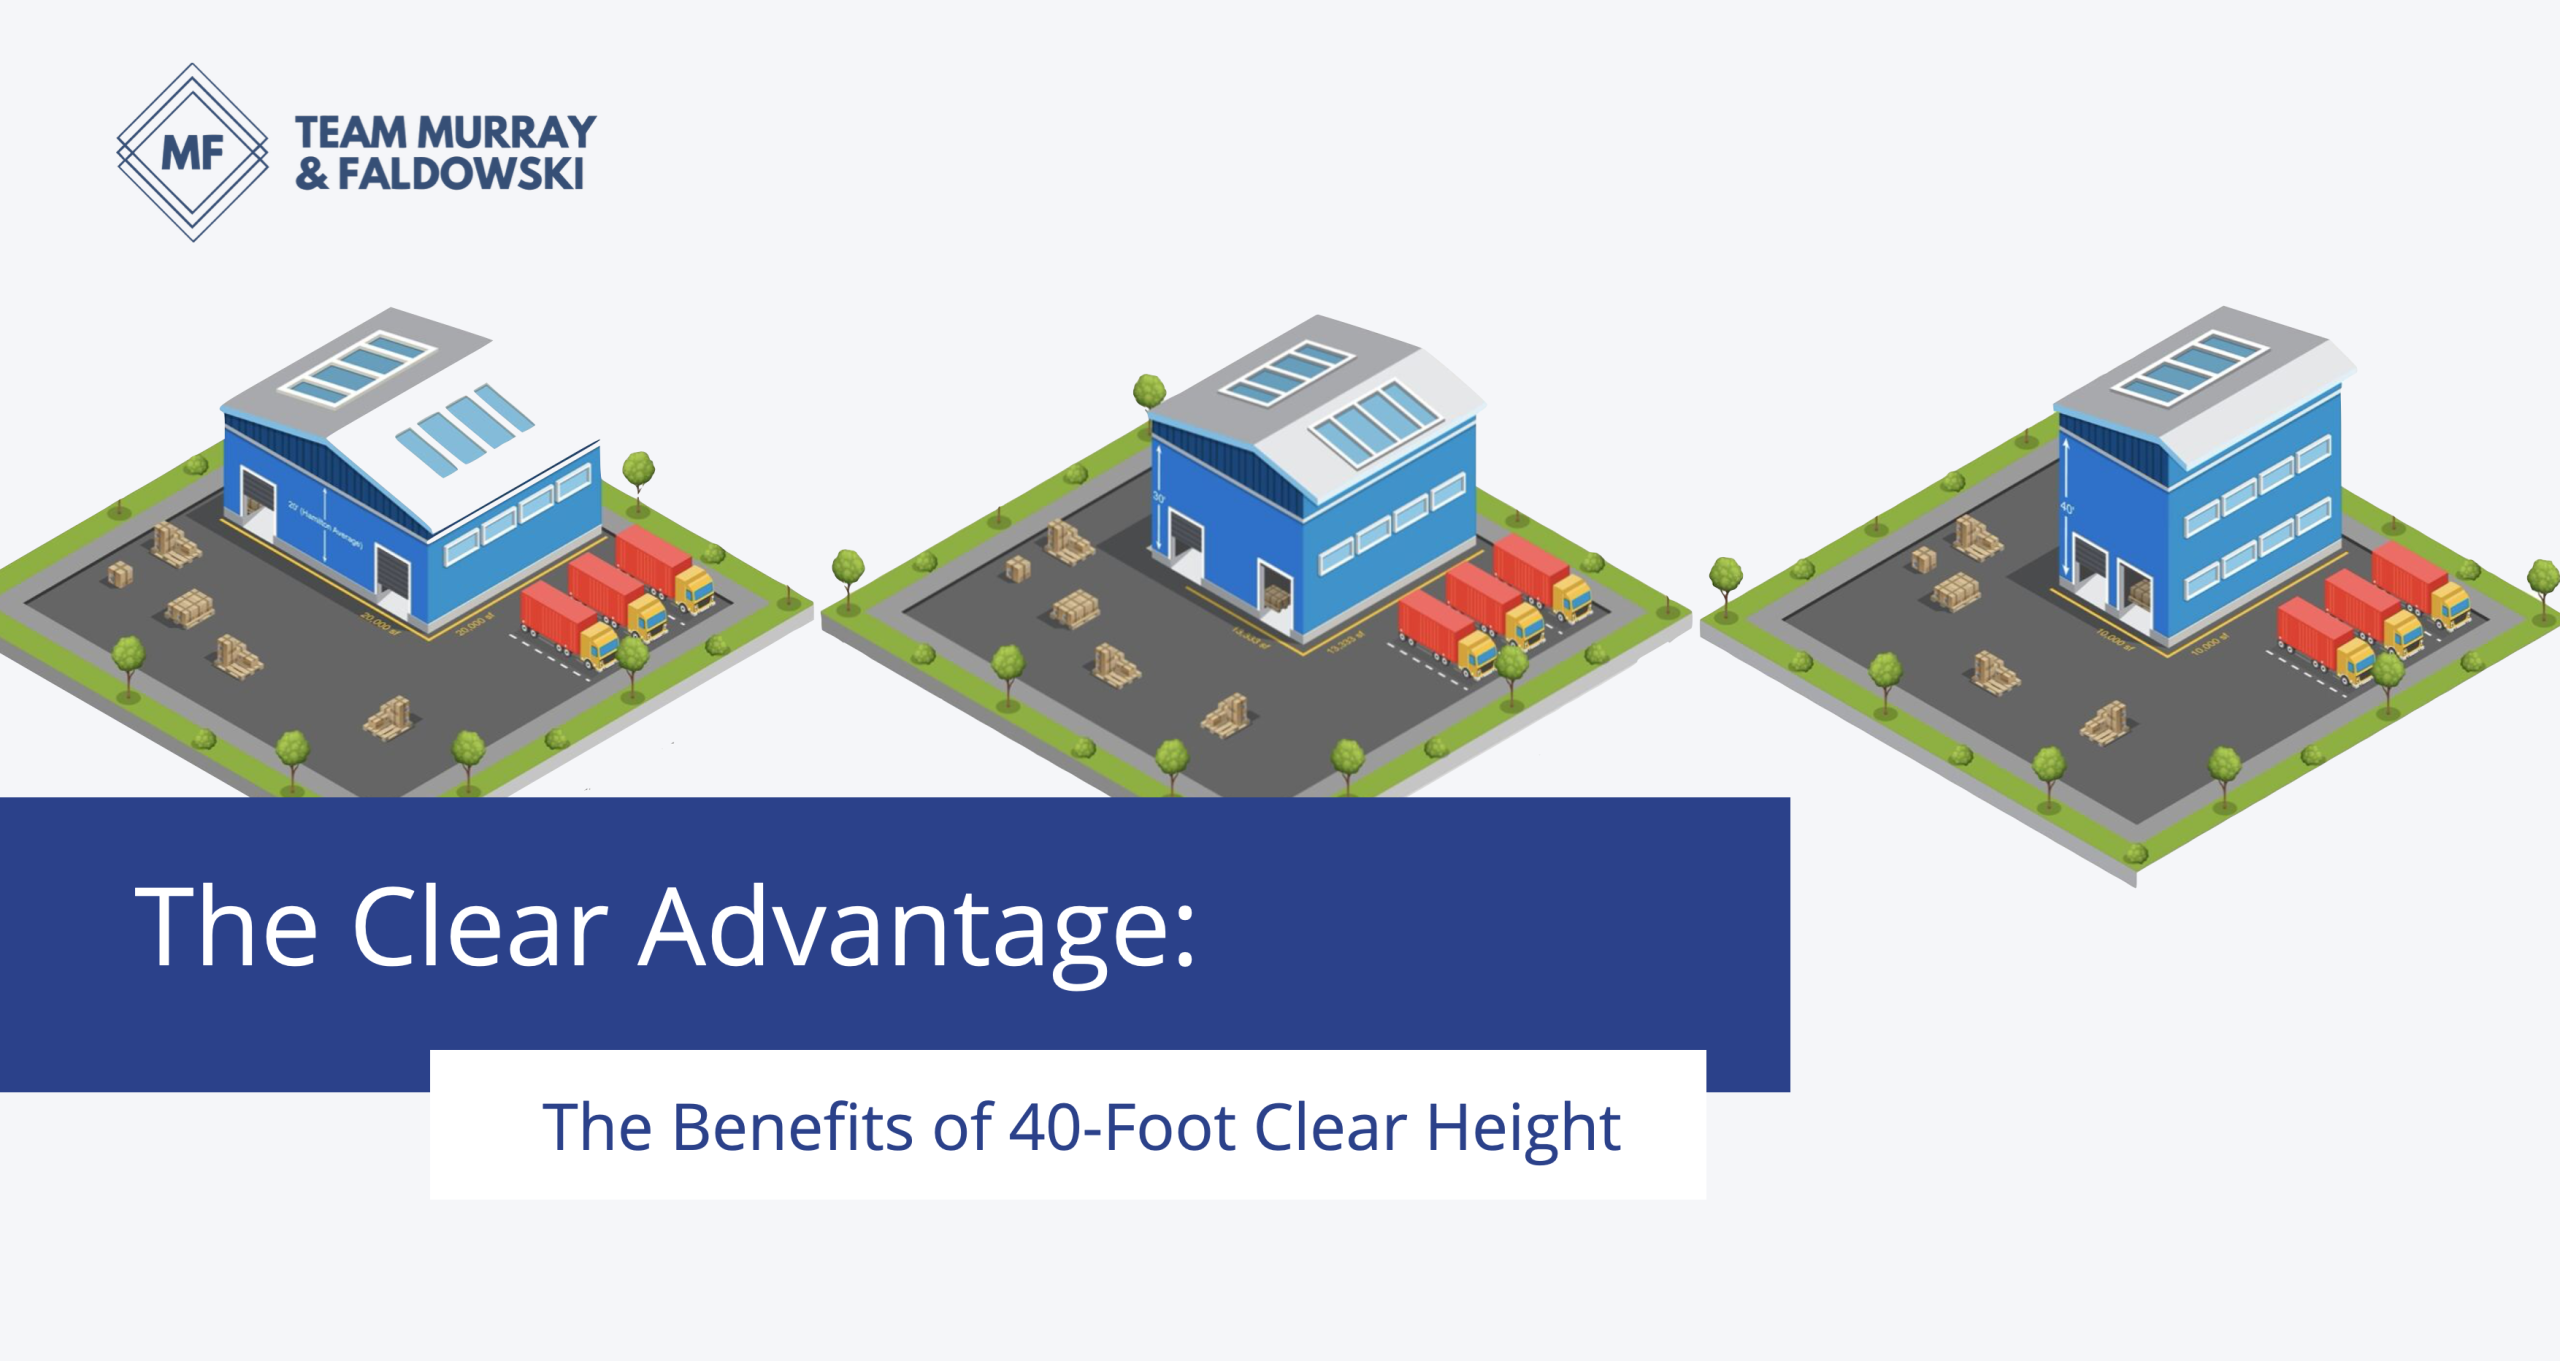 The Clear Advantage: Benefits of 40-Foot Clear Height